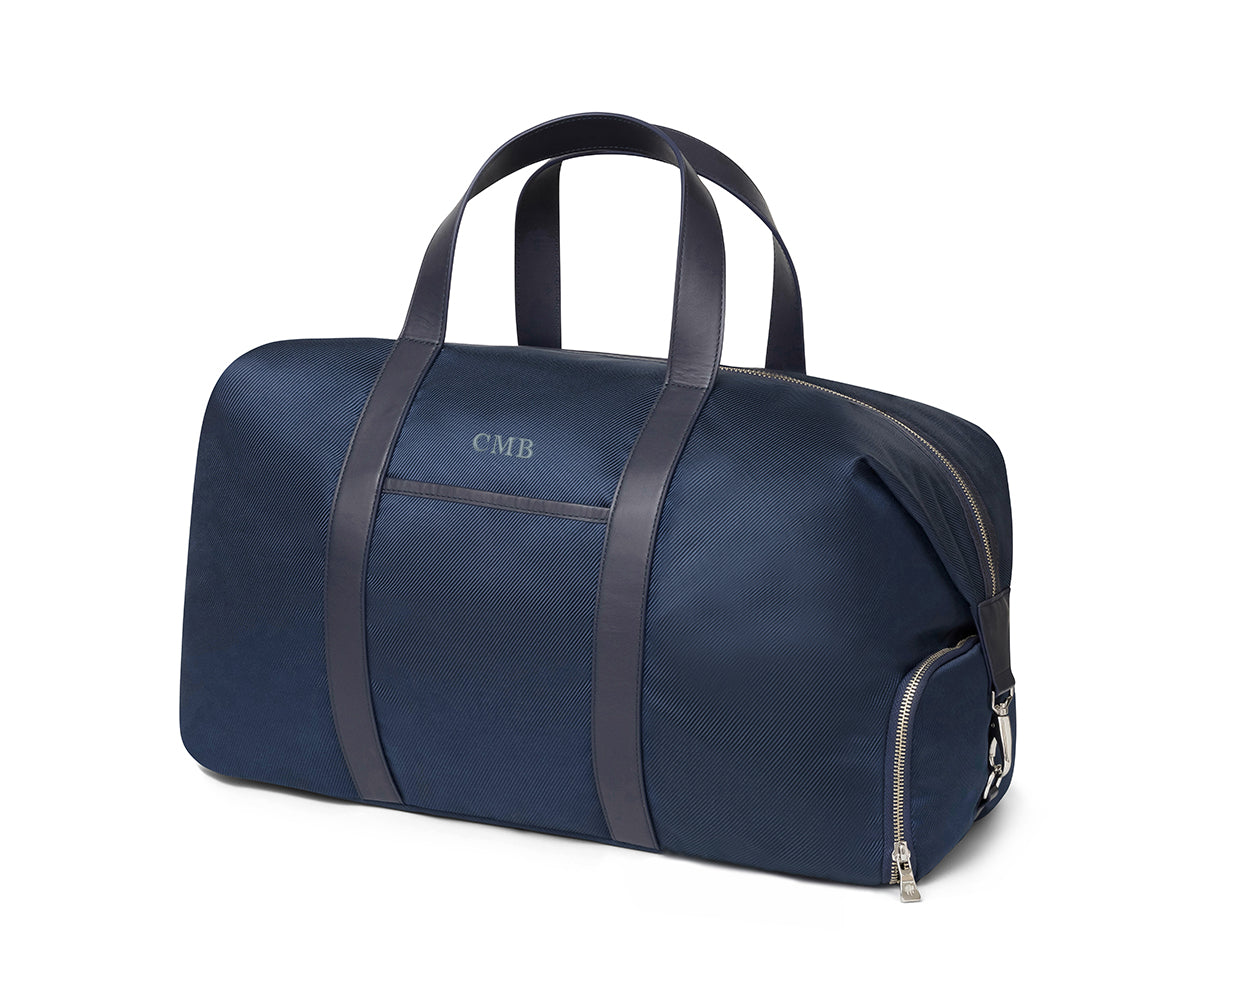 The Byers Duffel Bag: Navy Ballistic with Slate Blue Embroidered Lettering